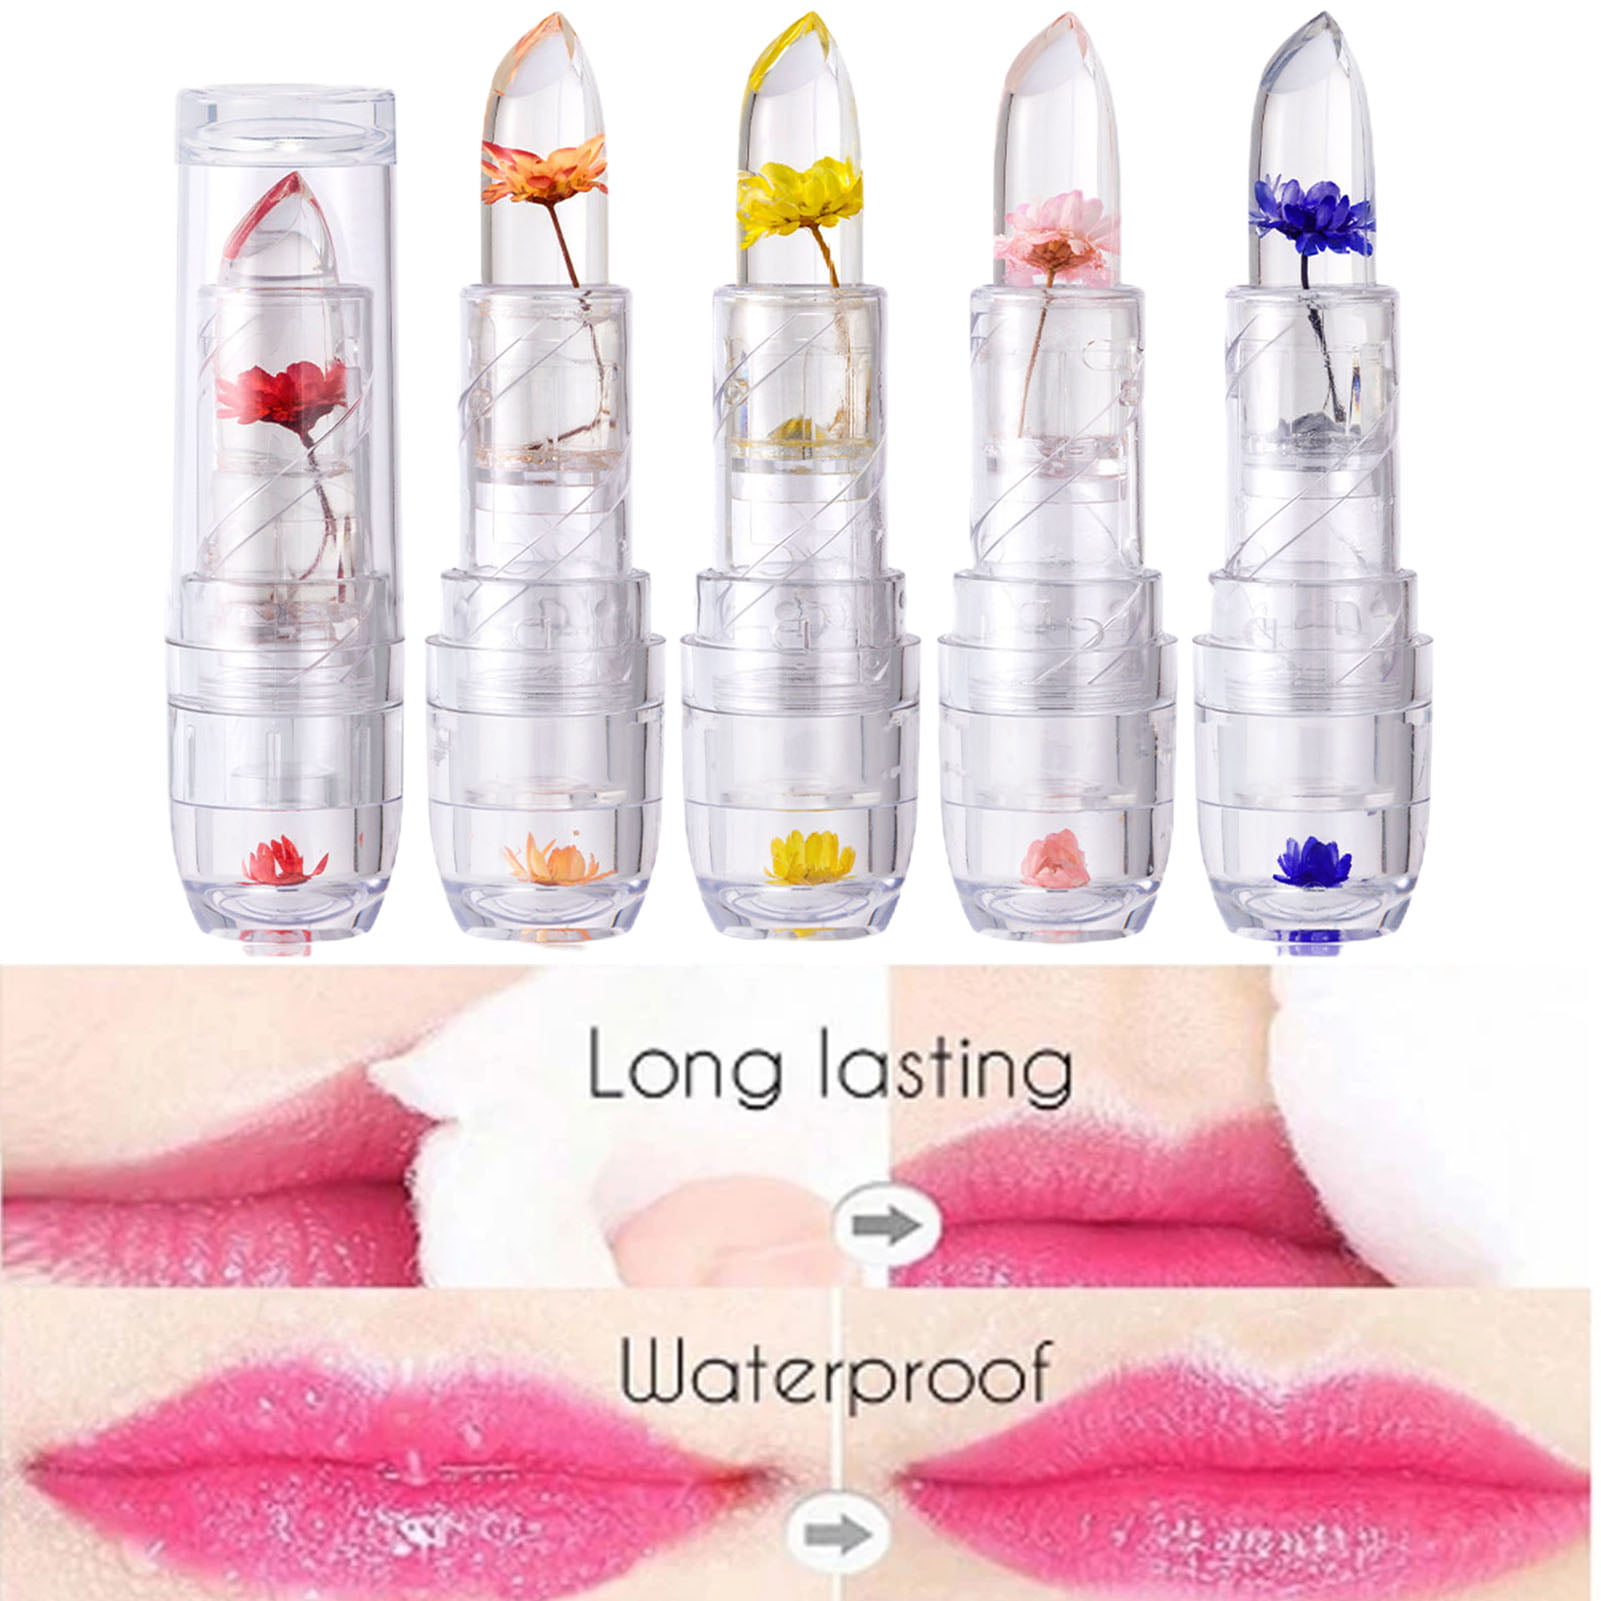 Long-Lasting Dried Flower Jelly Lipstick Moisturizes and Keeps The Color Changing Lipstick Moist Long Lasting Lip Gloss Spray Mist Lip Balm Pack Lip